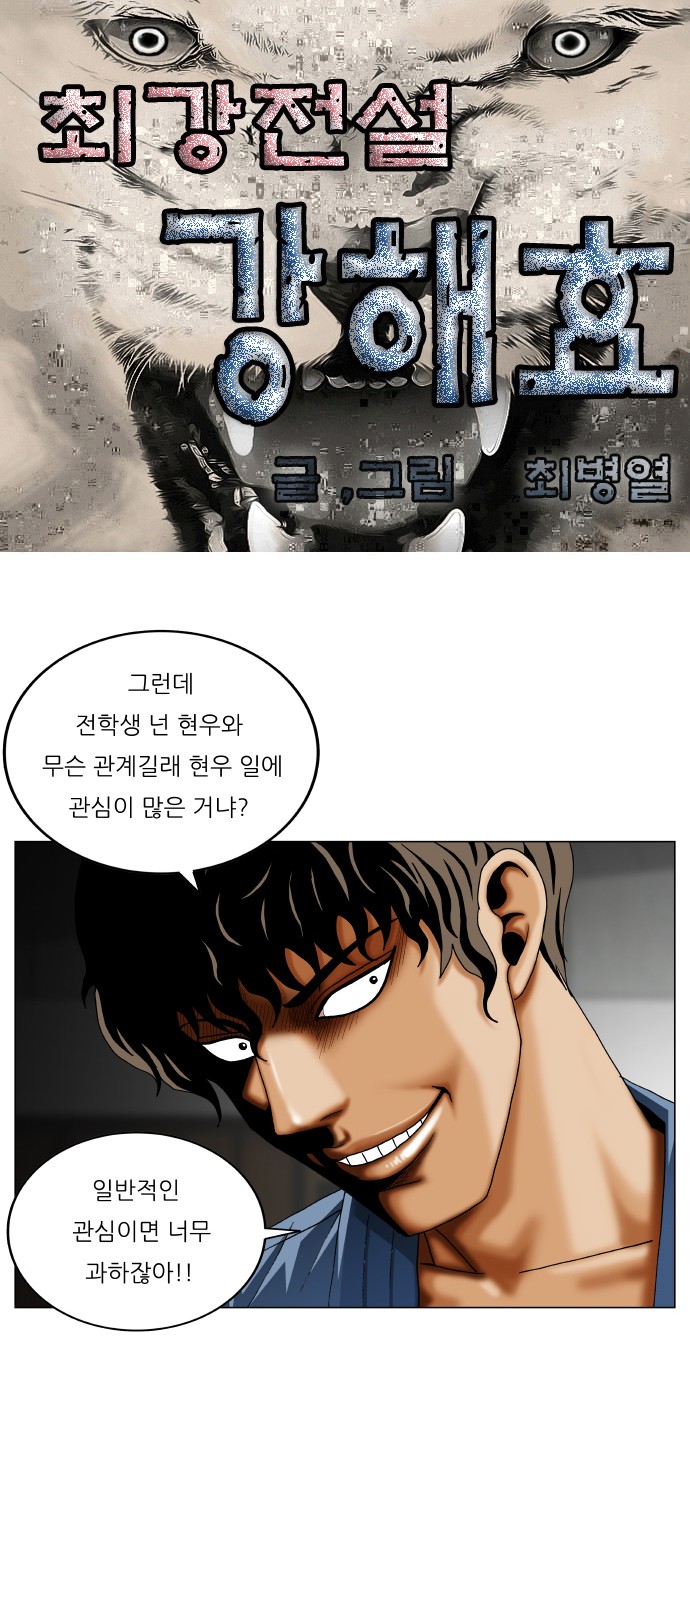 Ultimate Legend - Kang Hae Hyo - Chapter 373 - Page 1